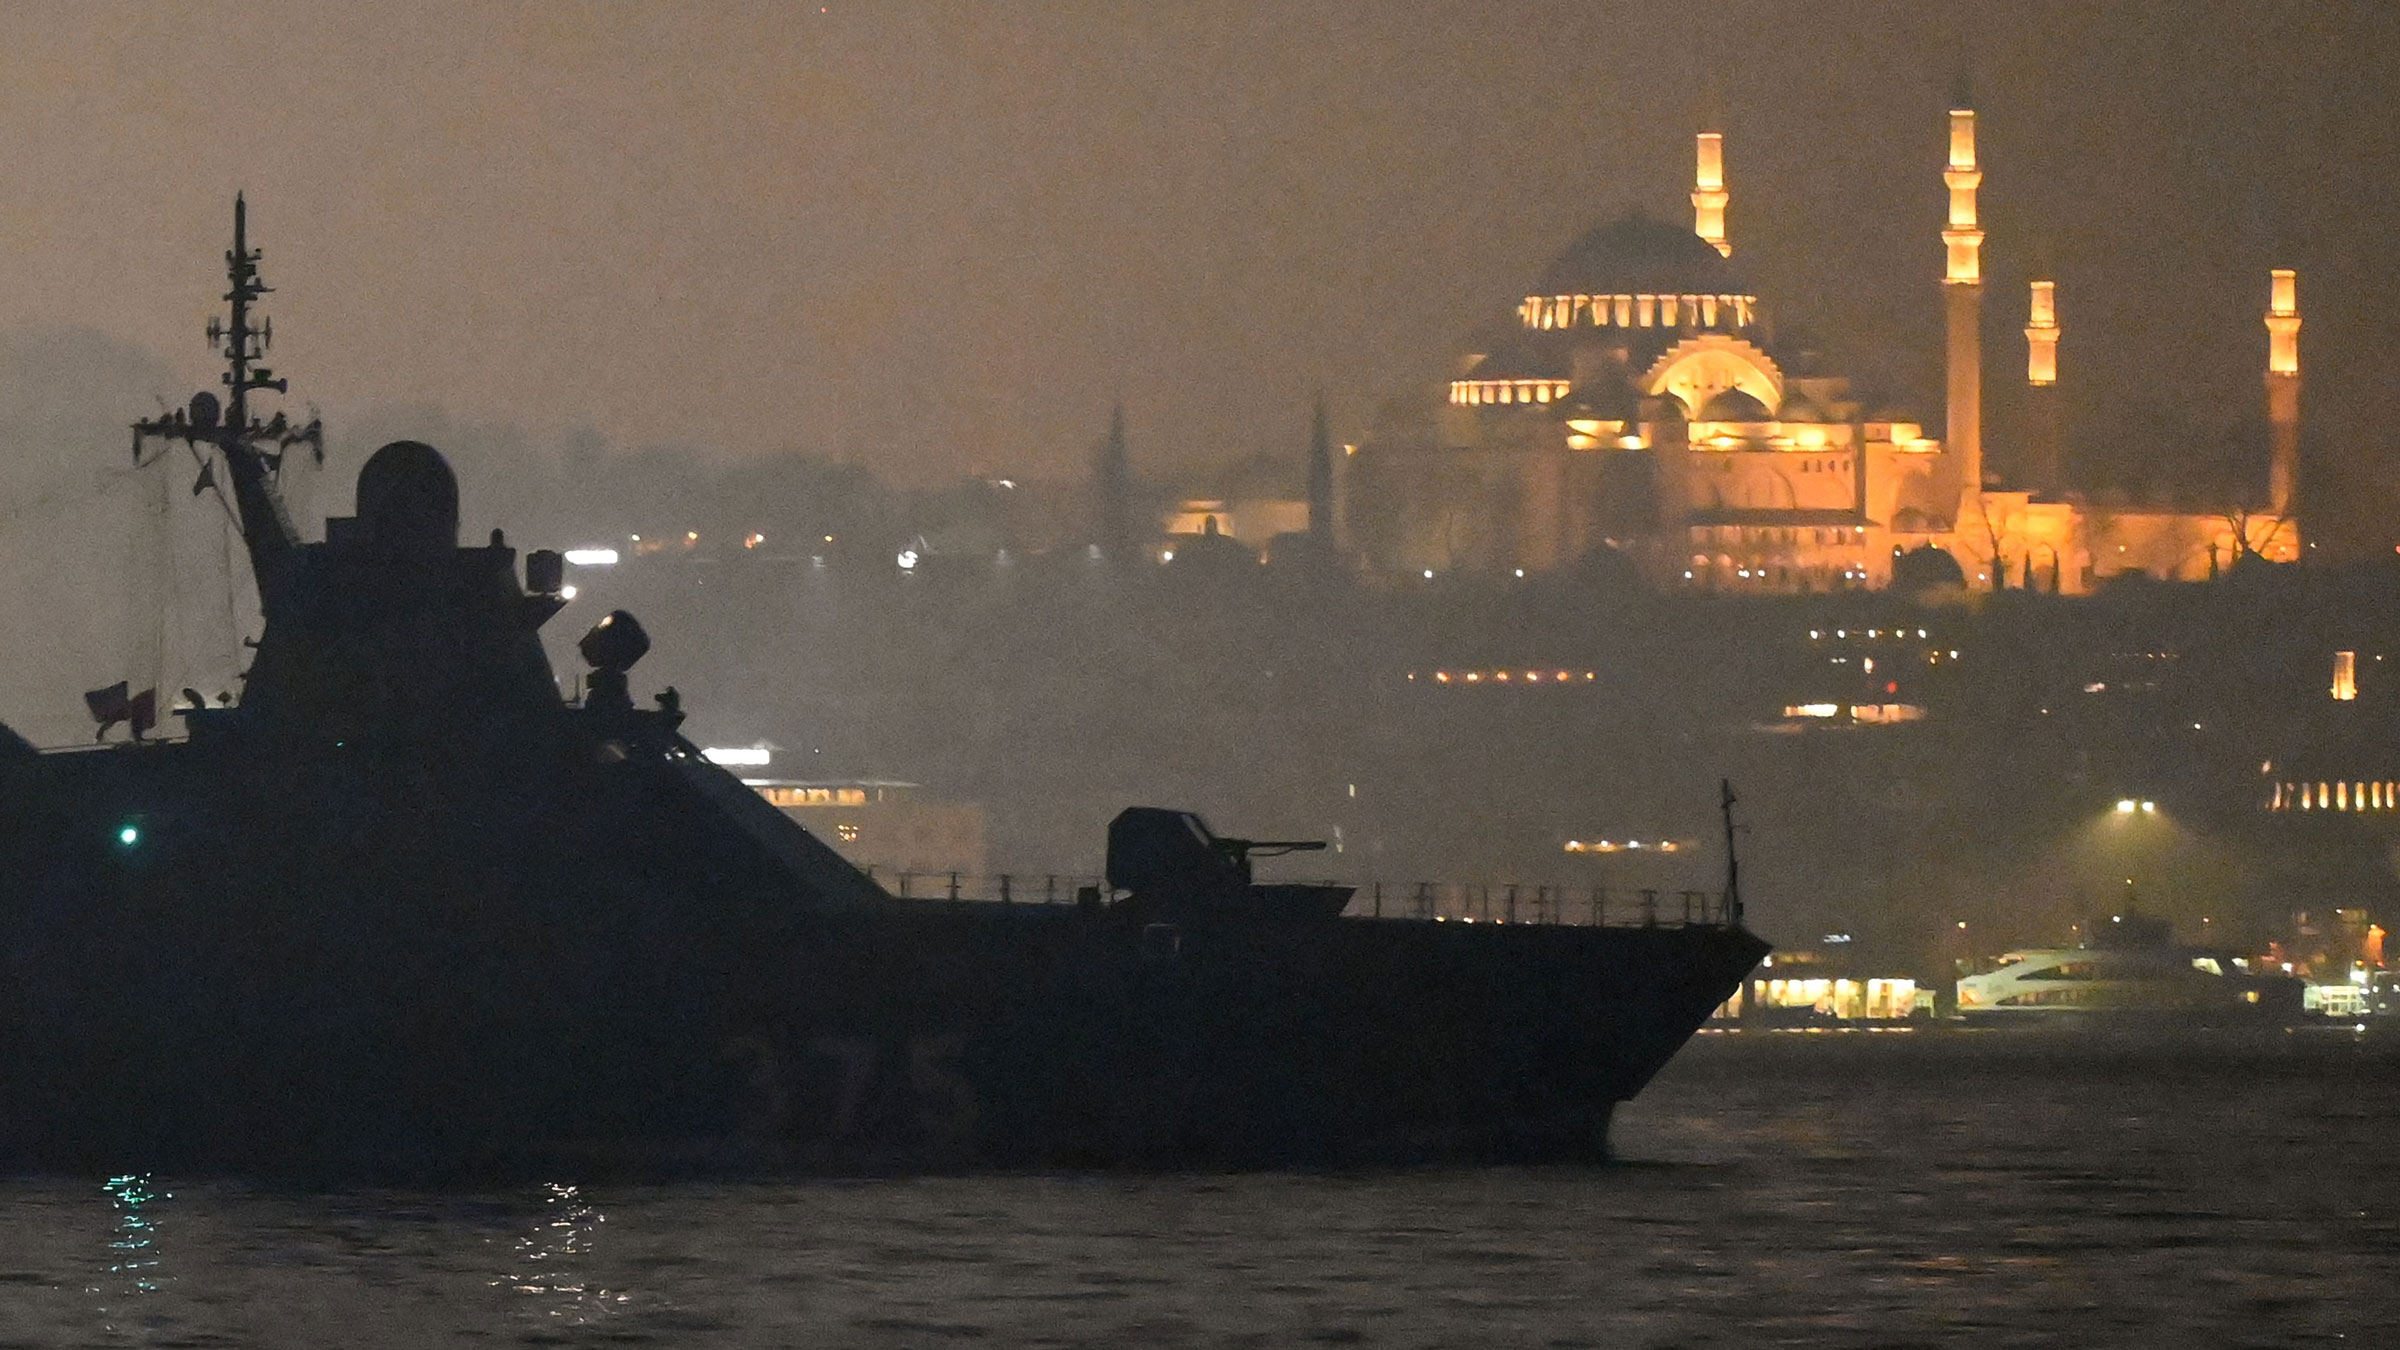 A Russian patrol boat travels through the Bosphorus Strait, past the city of Istanbul, on February 16.